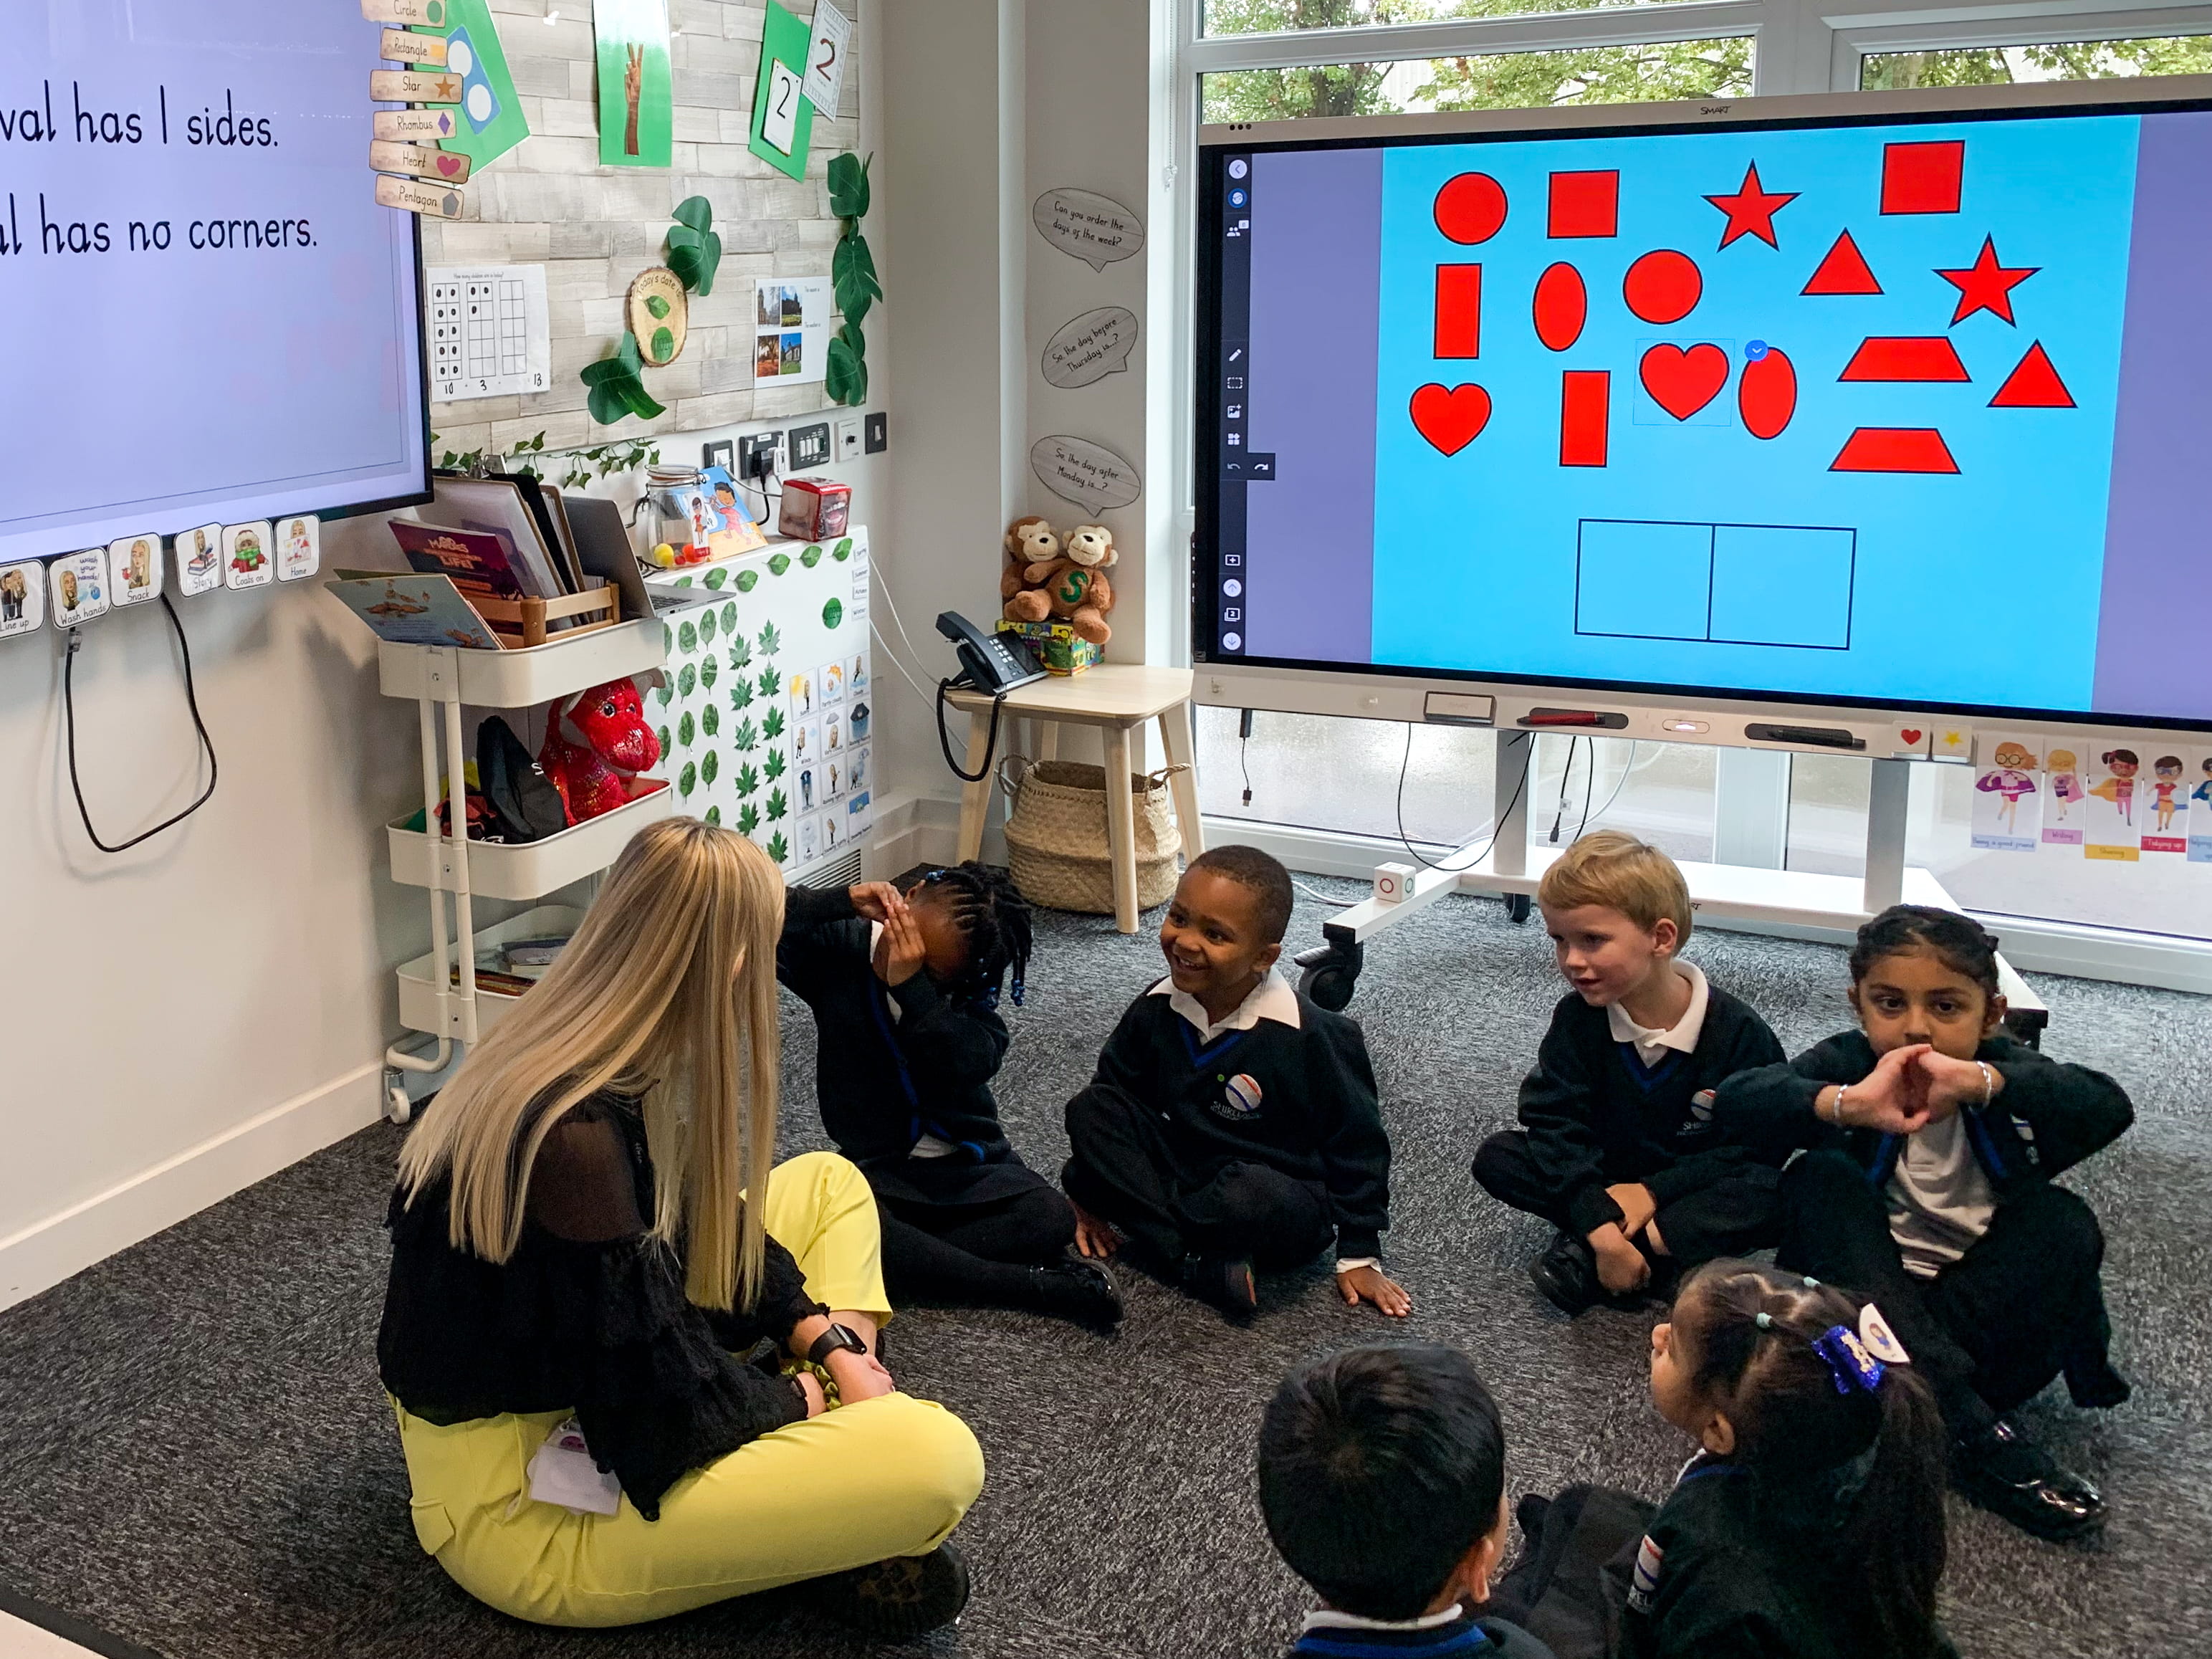 Students gather on the floor with their teacher for a lesson. SMART displays pictured in the background.